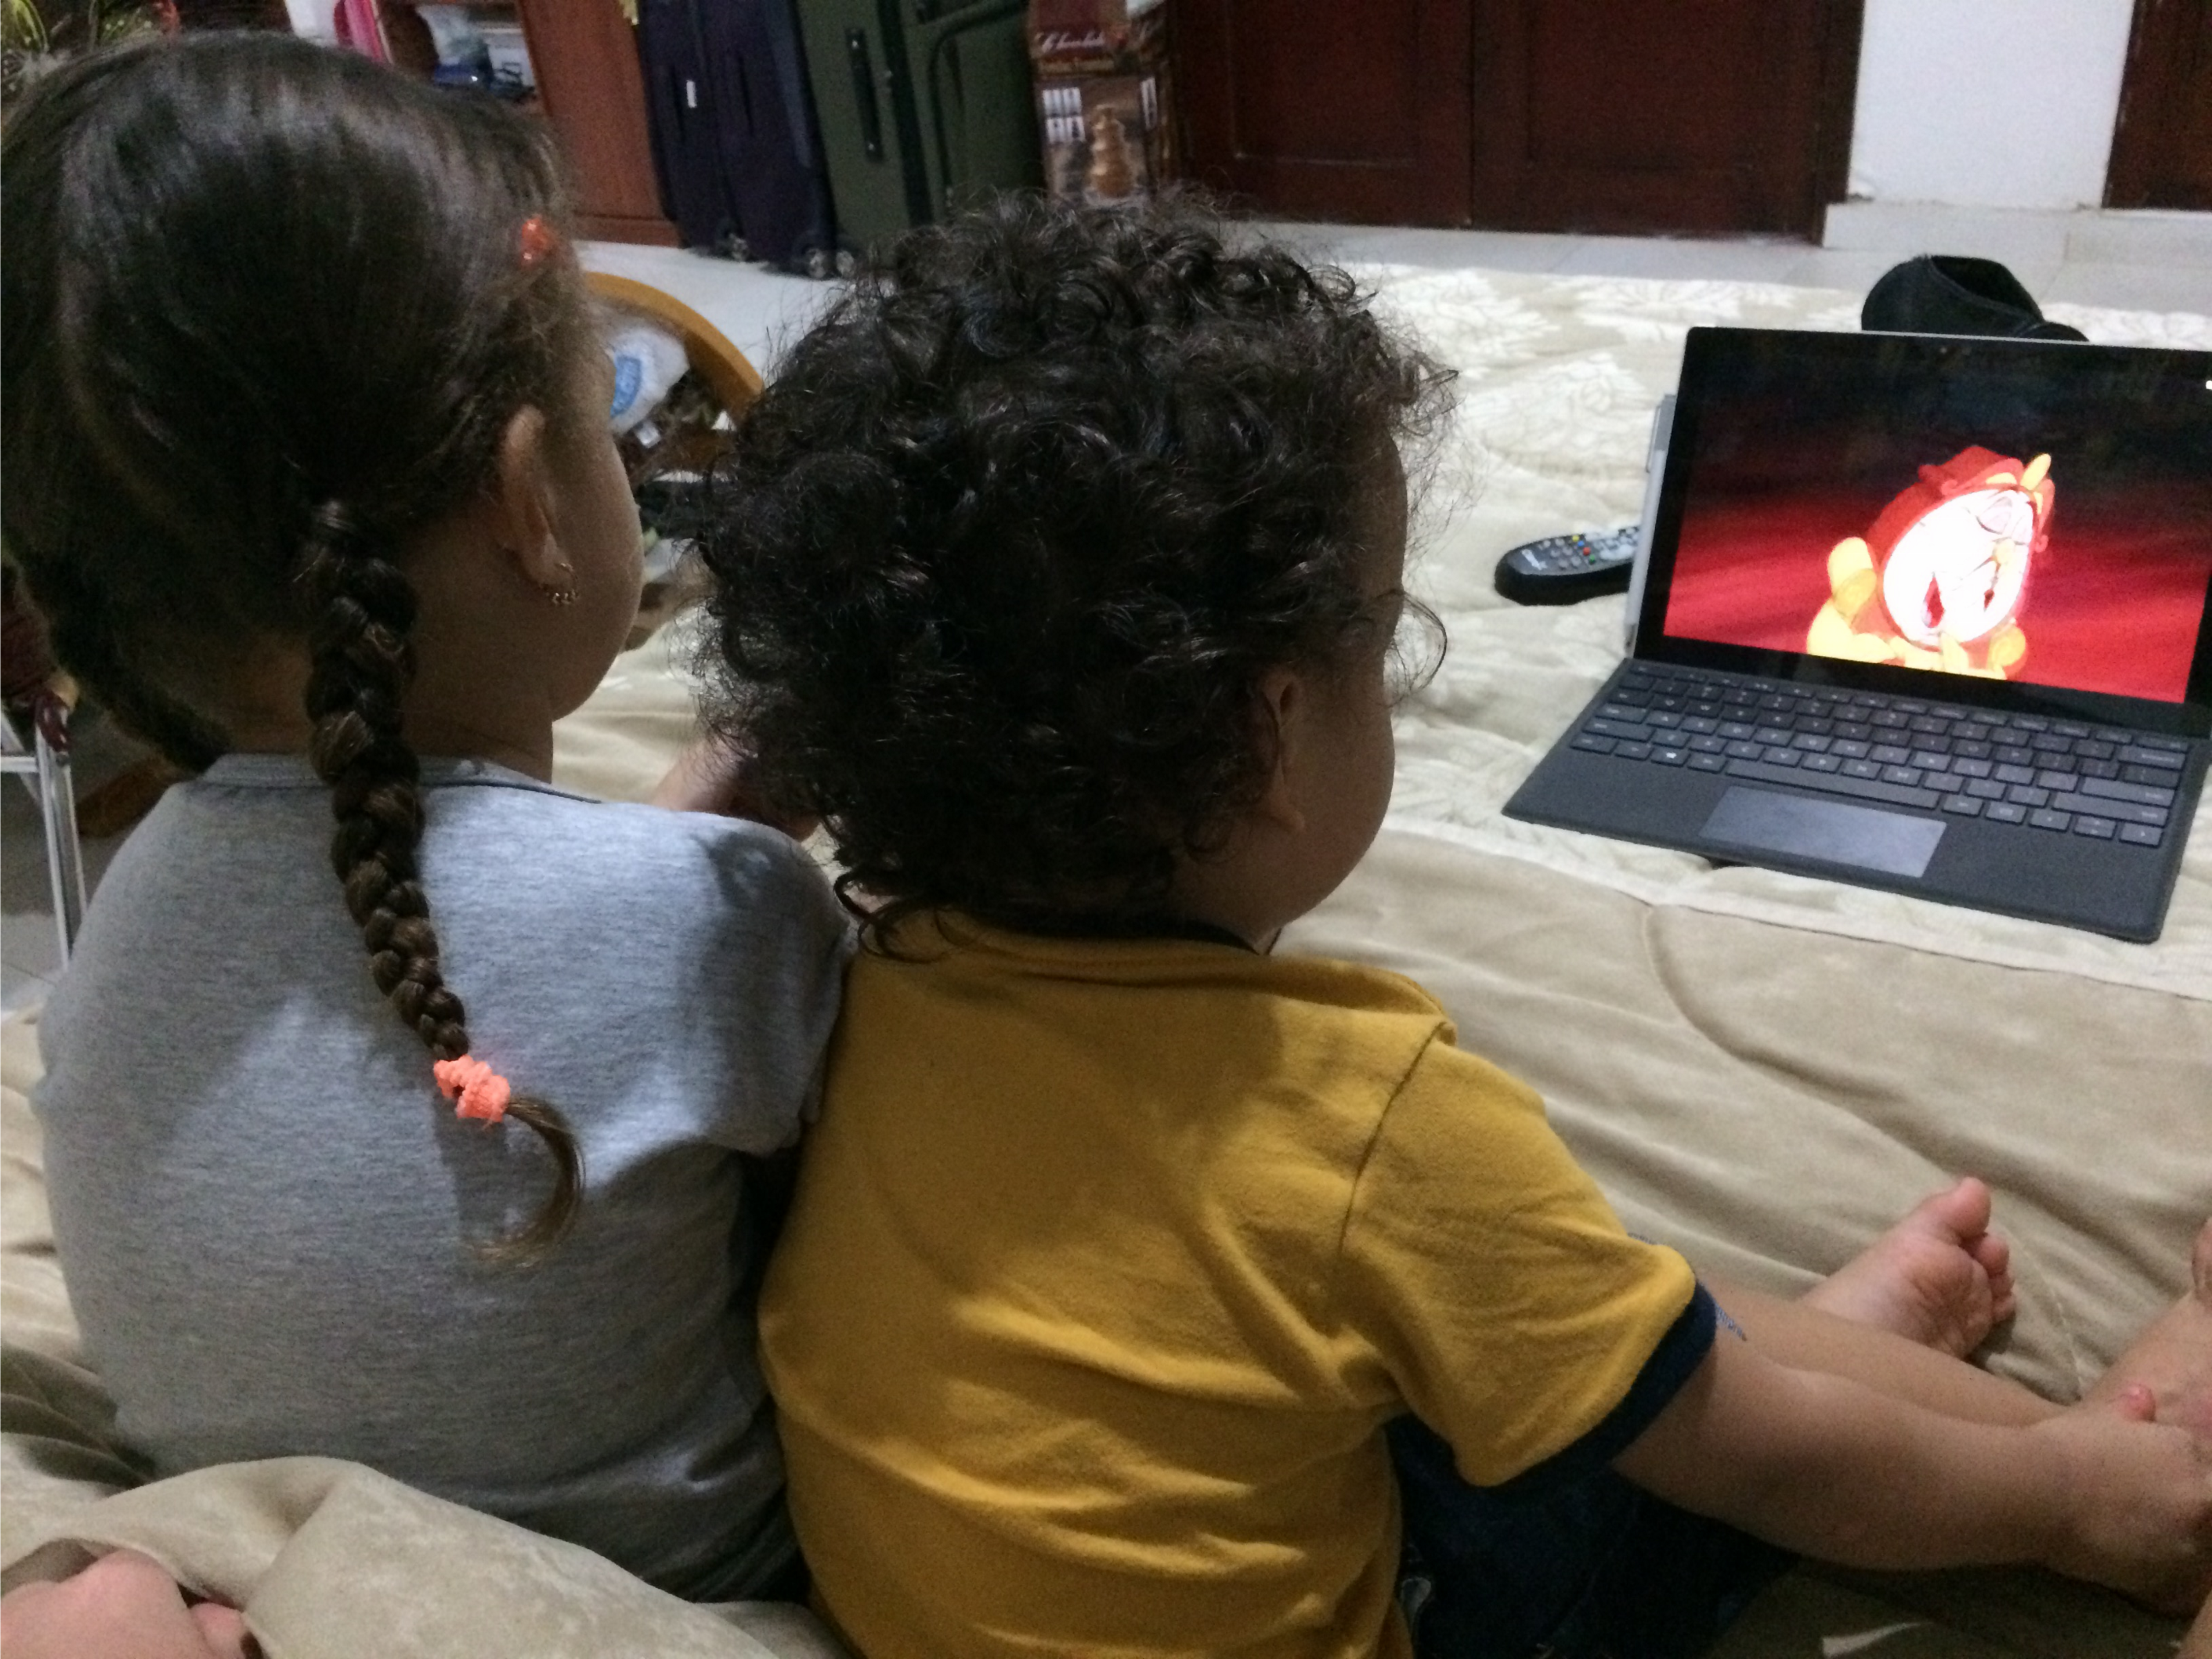 Kathy’s Goddaughter and nephew watching a movie.